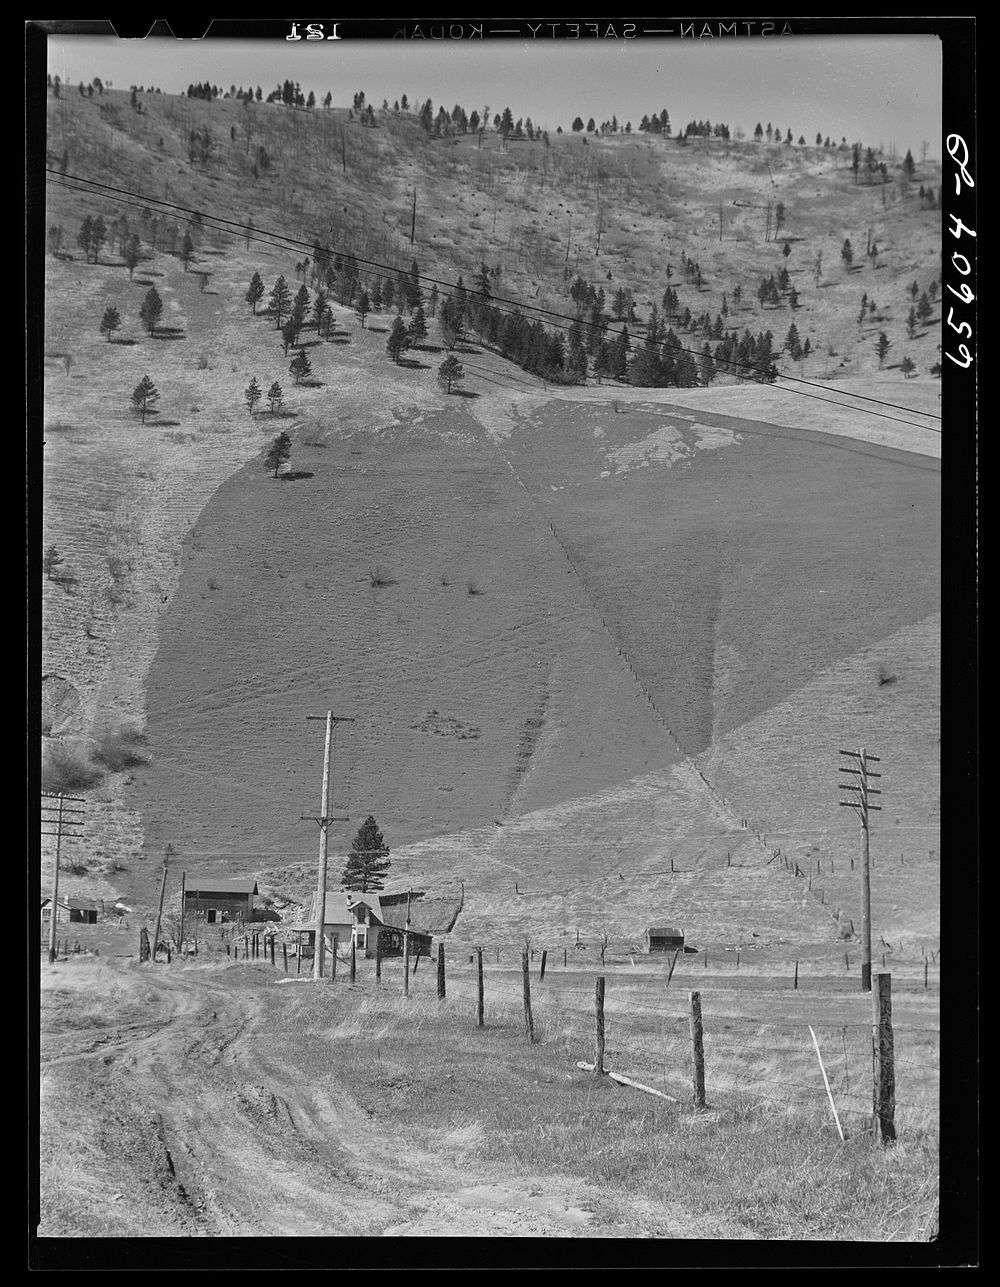 Missoula, Montana (vicinity). Farm. Sourced from the Library of Congress.